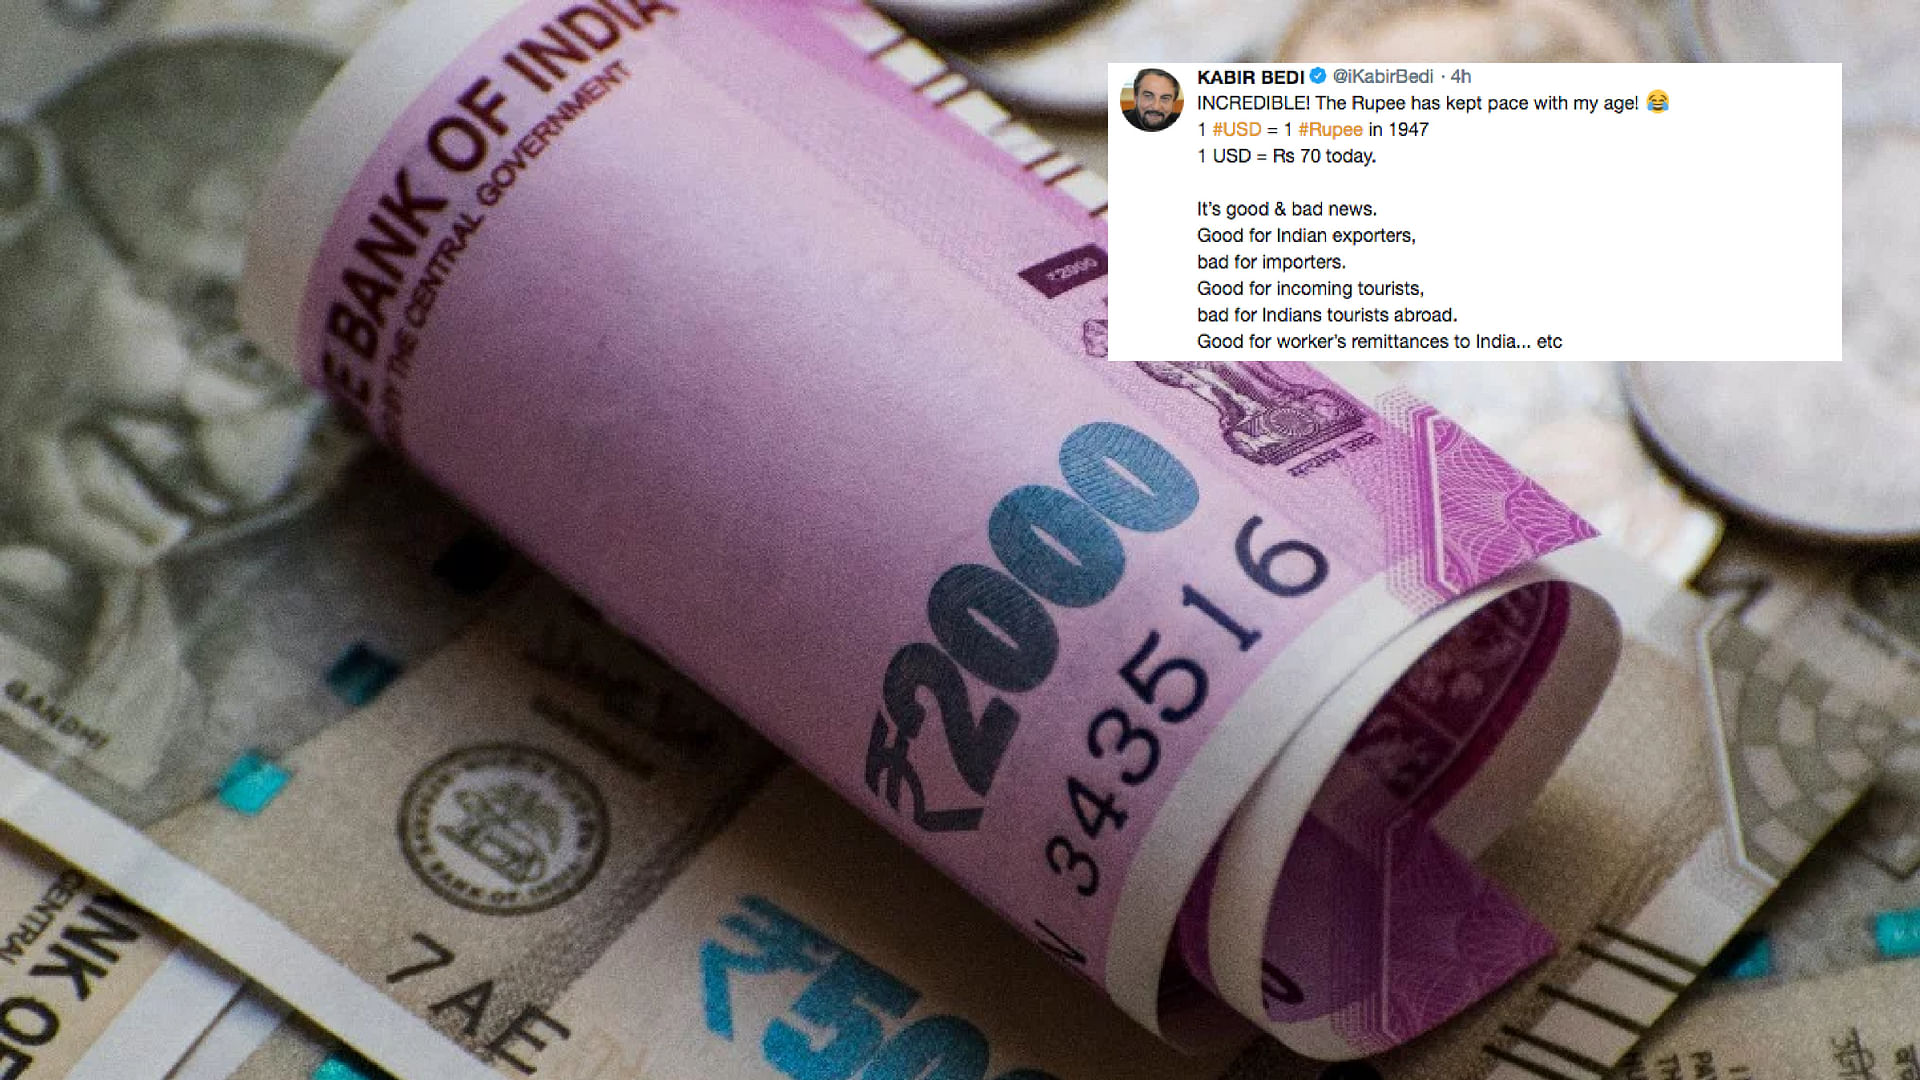  Twitter couldn’t keep calm after Indian rupee hit a record low on 14 August.